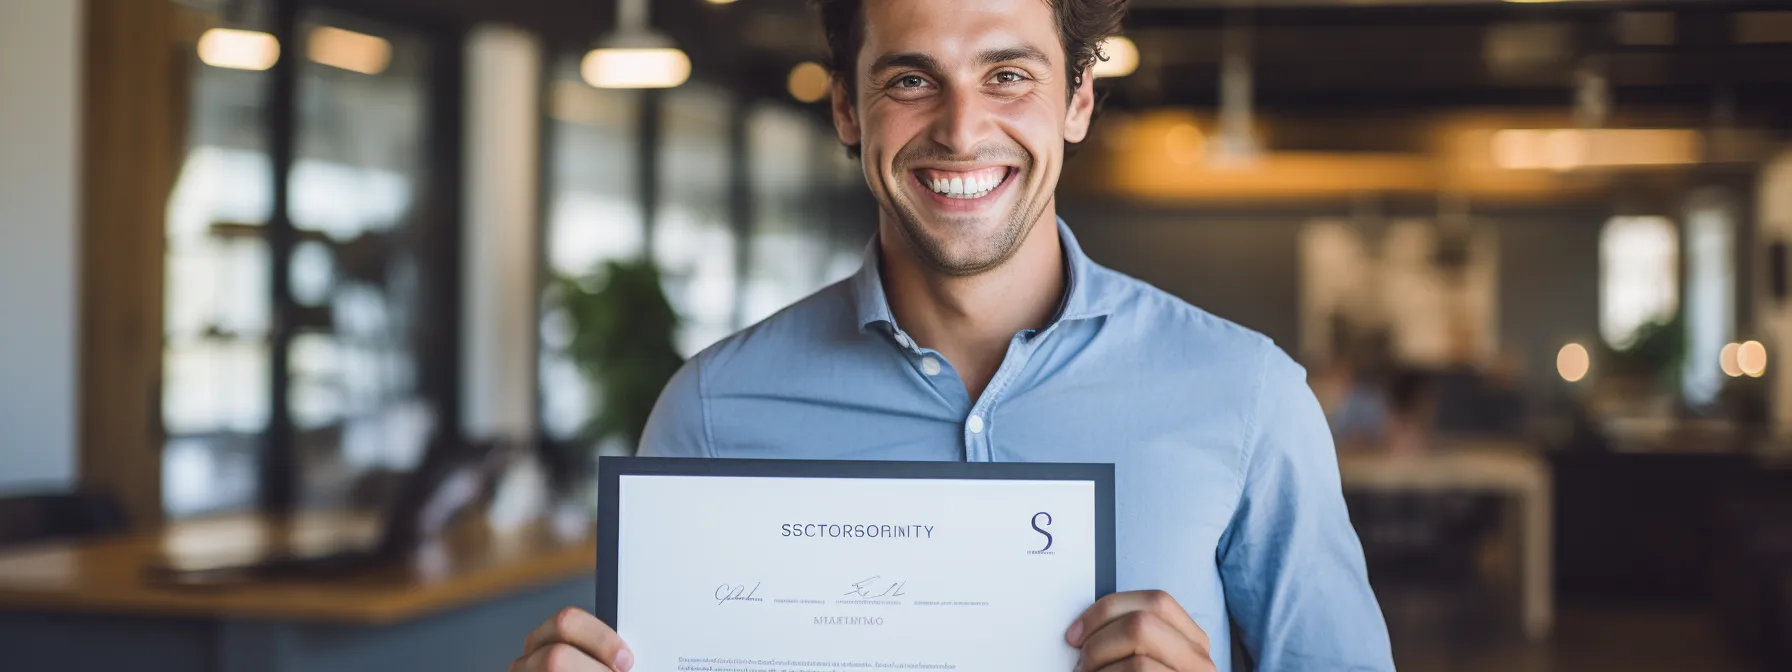 a person proudly holding their seotheory certificate with a smile.